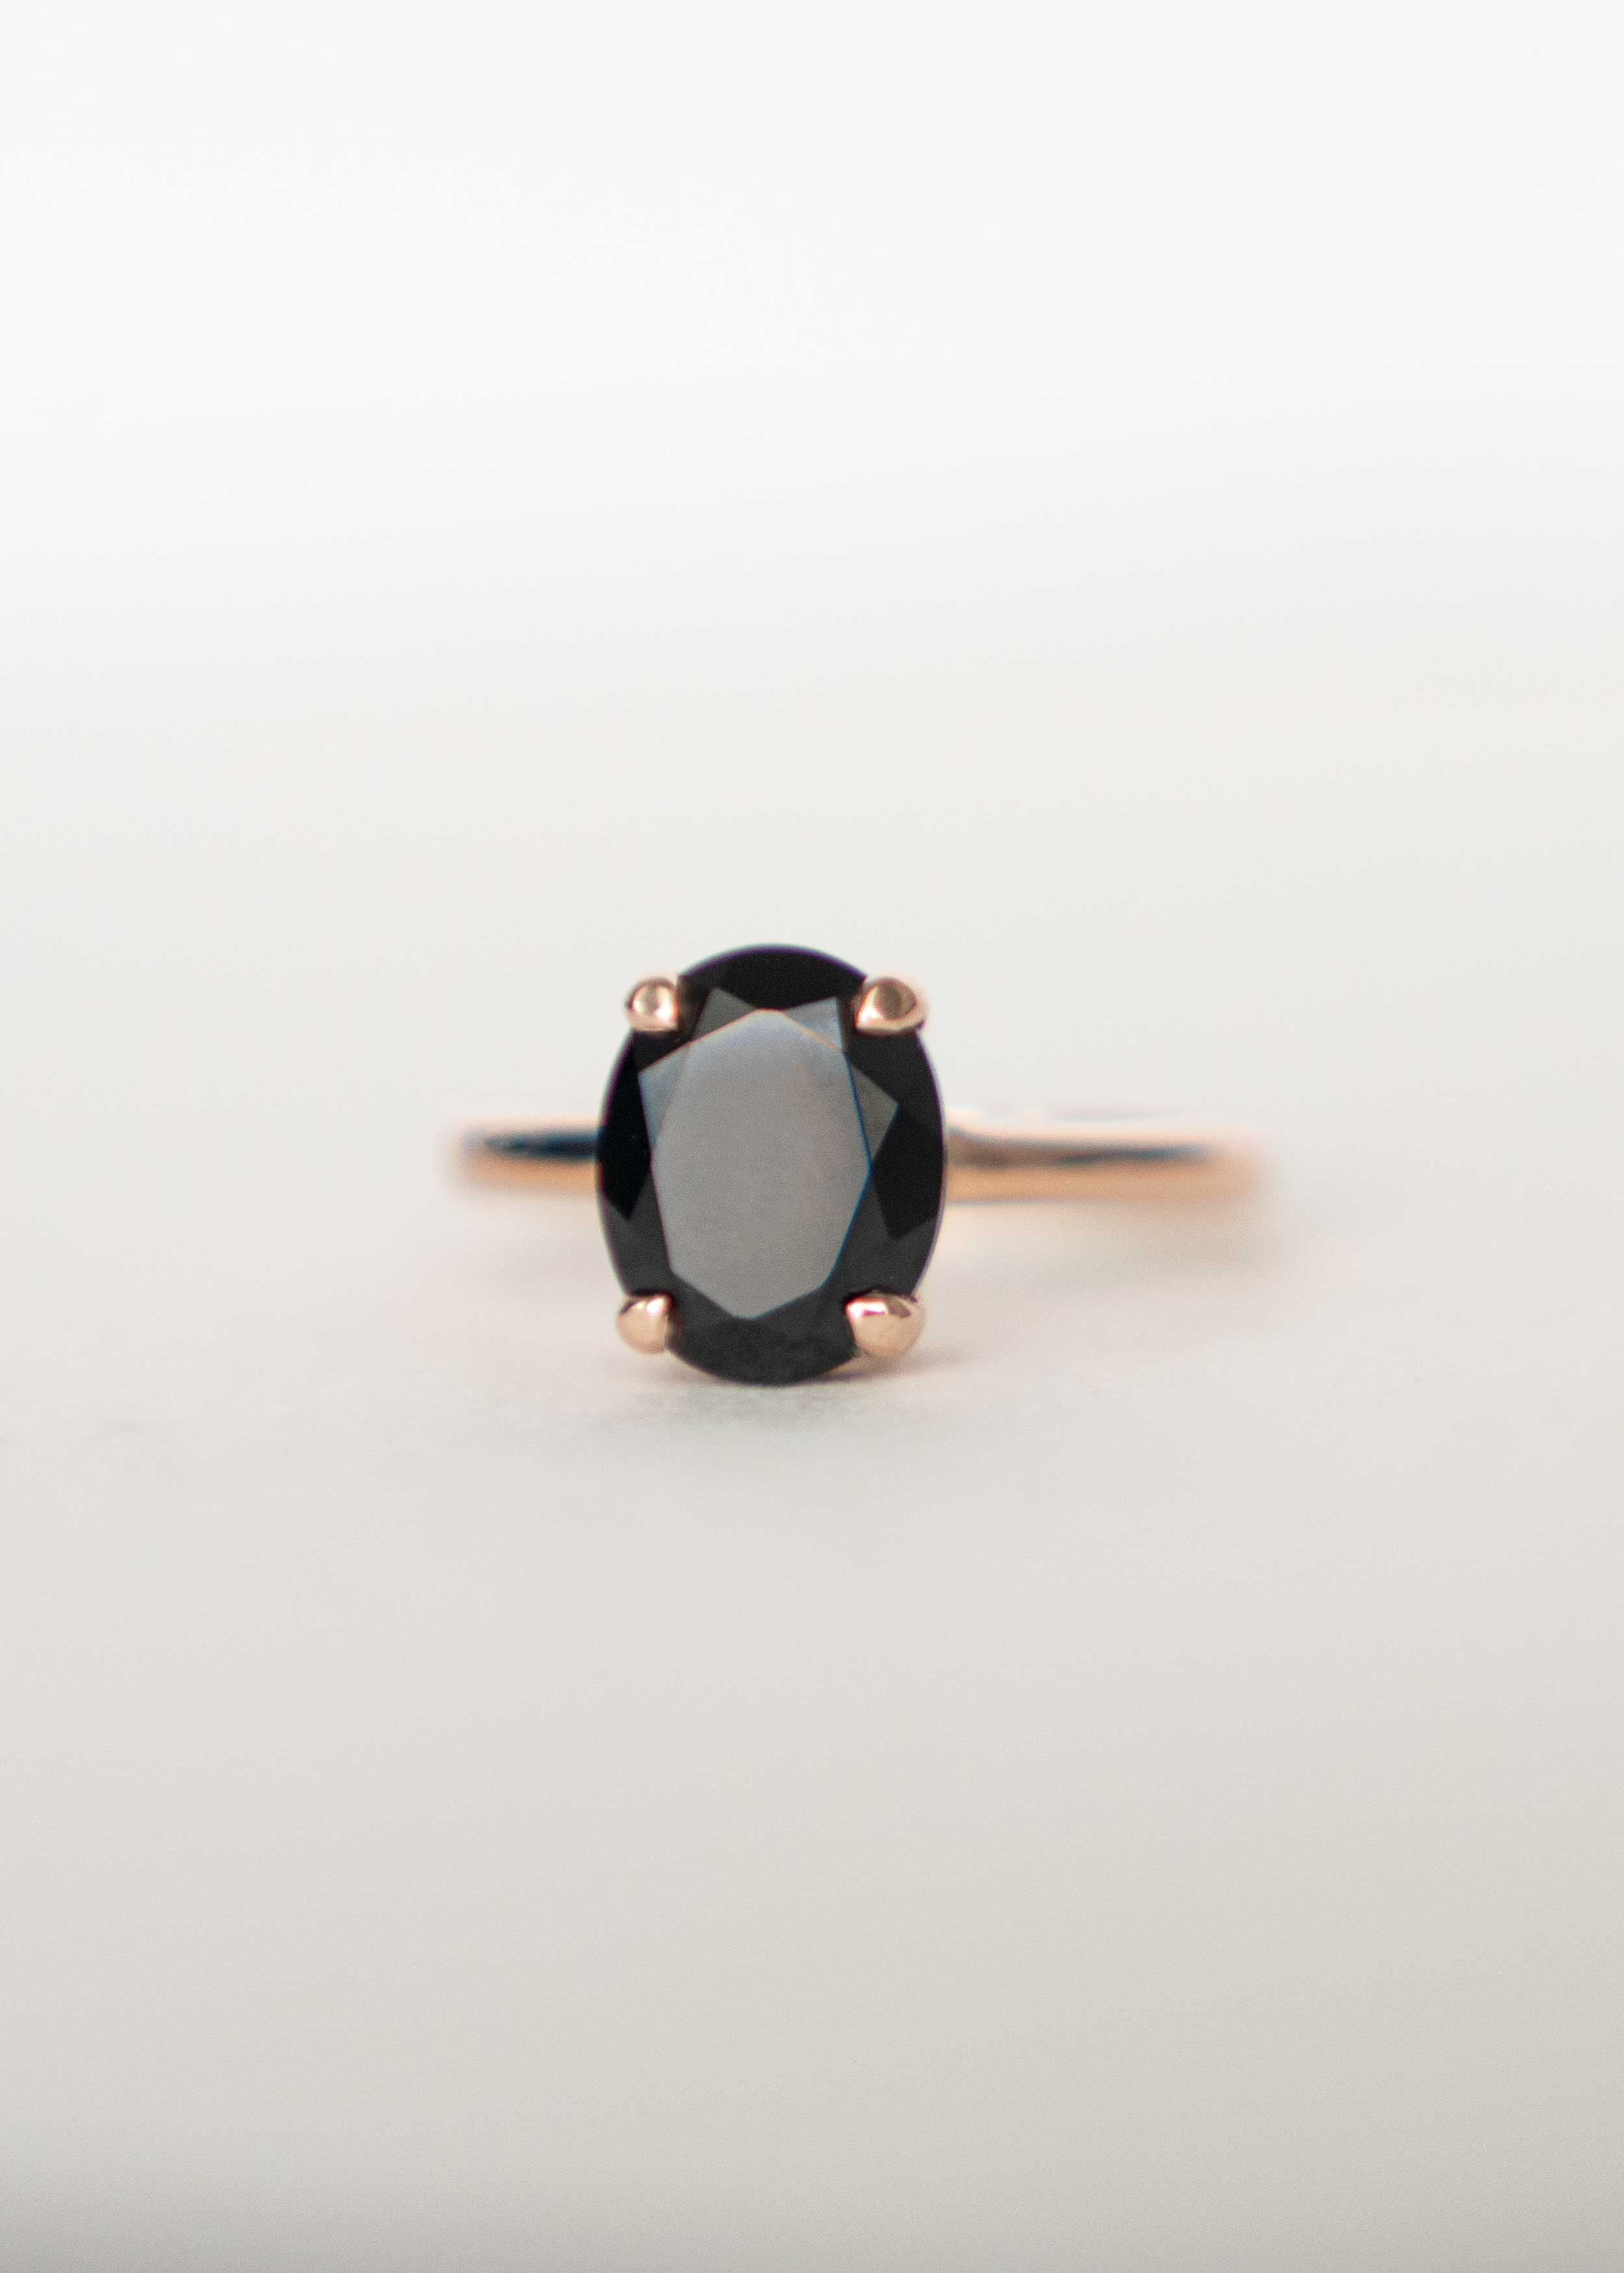 Black Onyx Gemstone Natural Genuine Rose Gold Large Statement Rings gifts for women